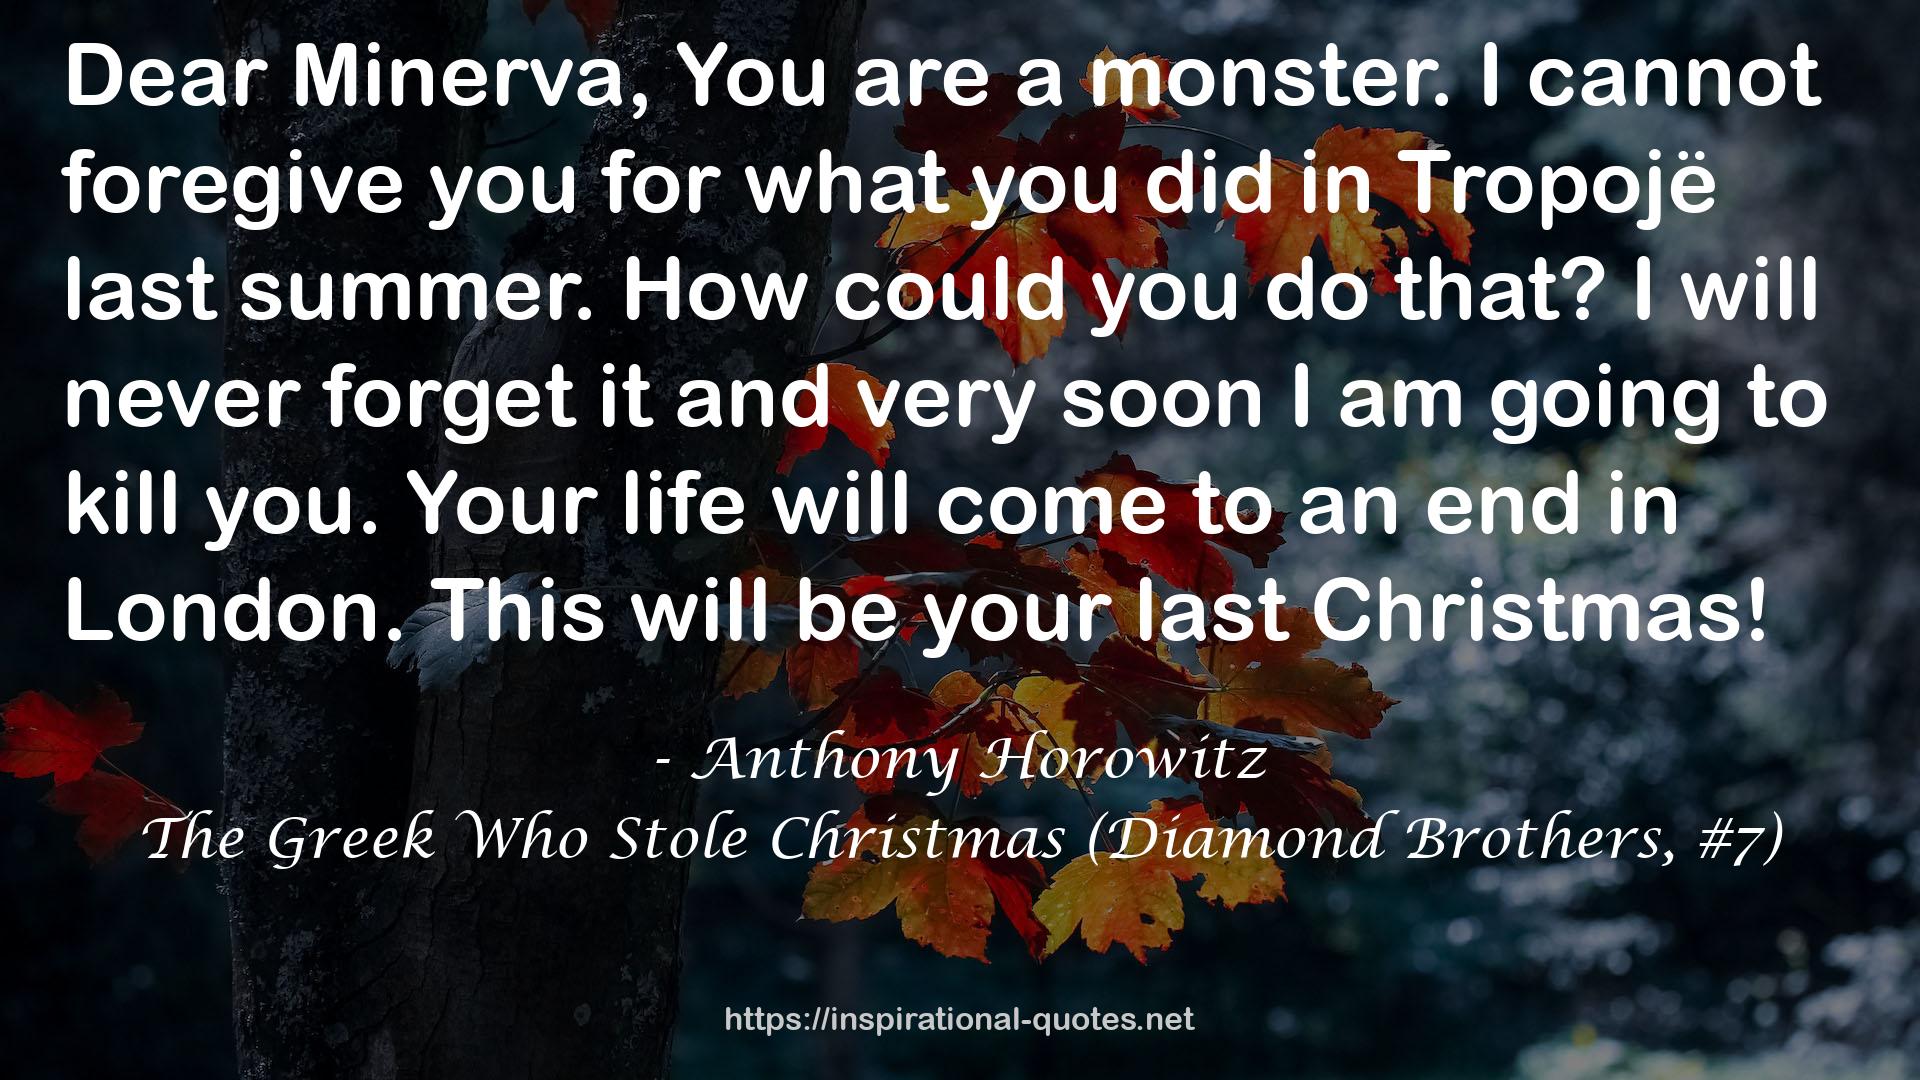 The Greek Who Stole Christmas (Diamond Brothers, #7) QUOTES